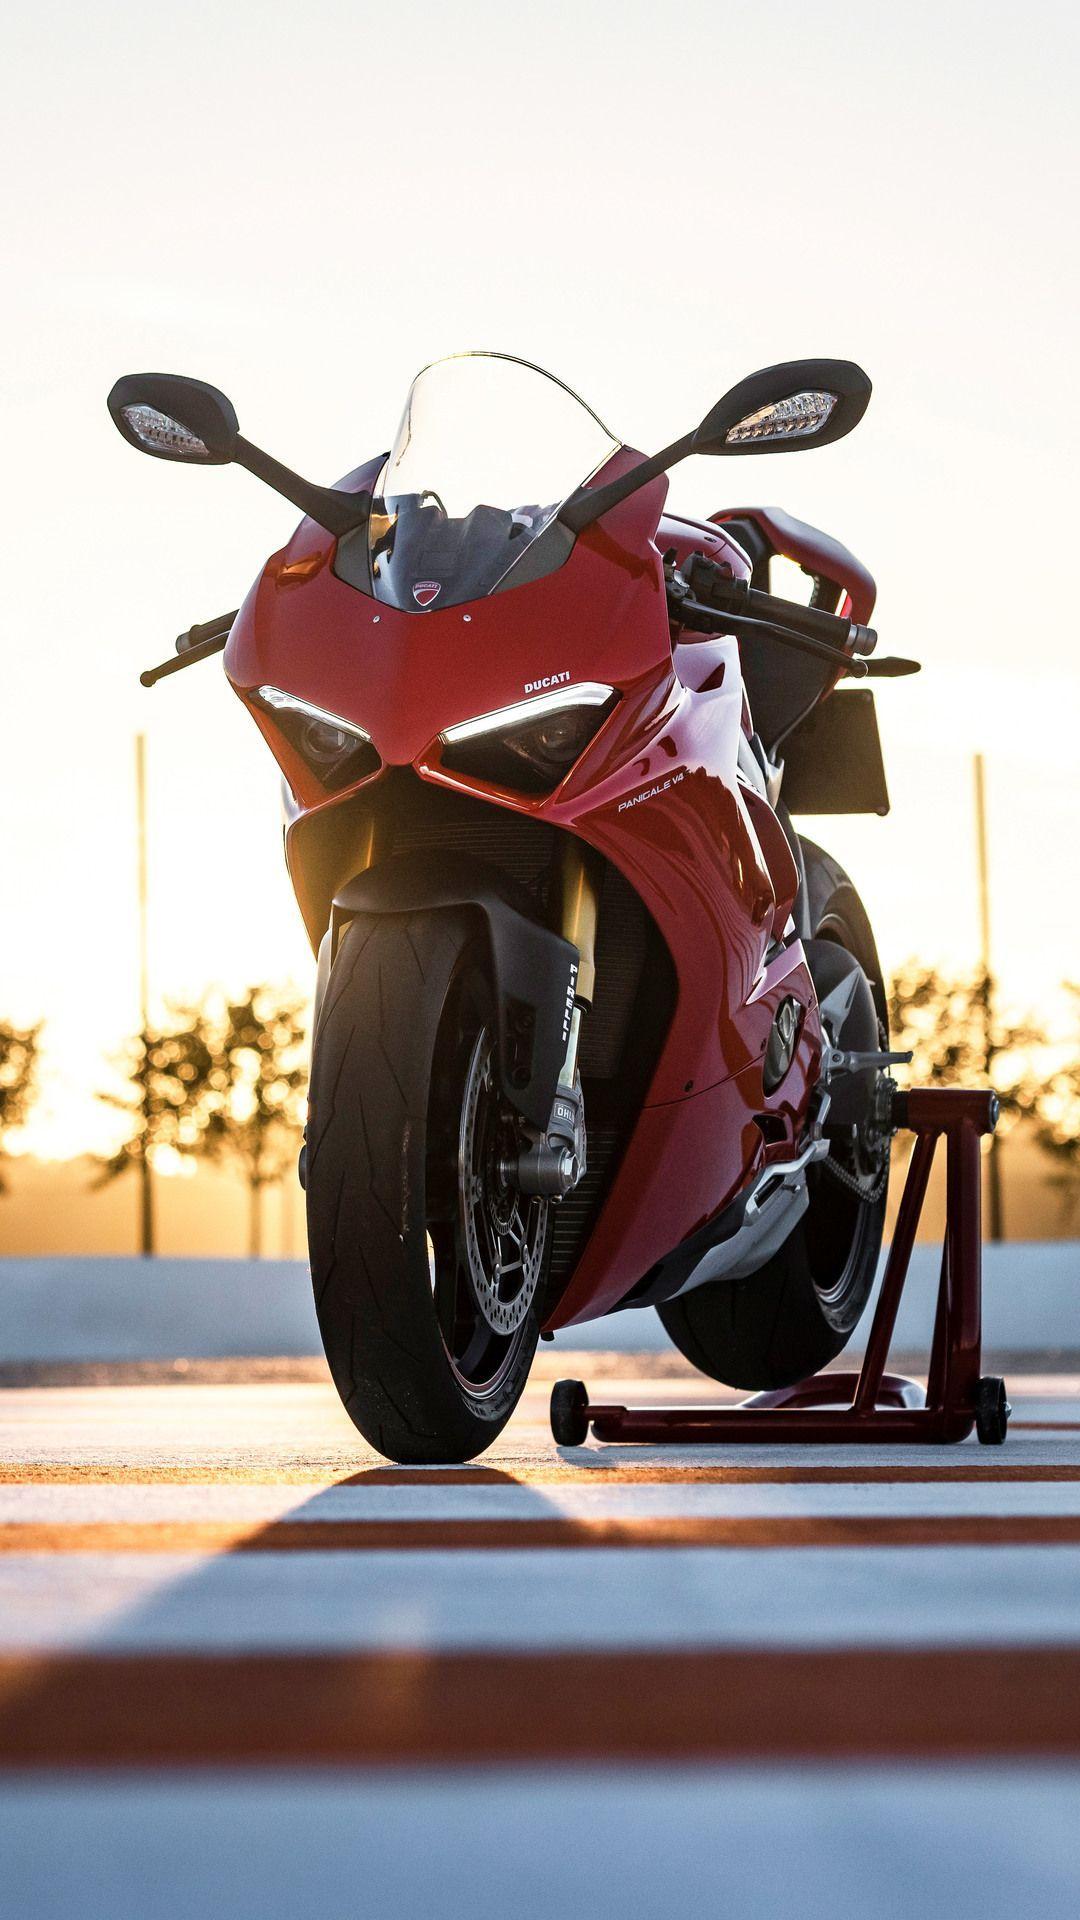 Ducati Panigale V4r Wallpapers Top Free Ducati Panigale V4r